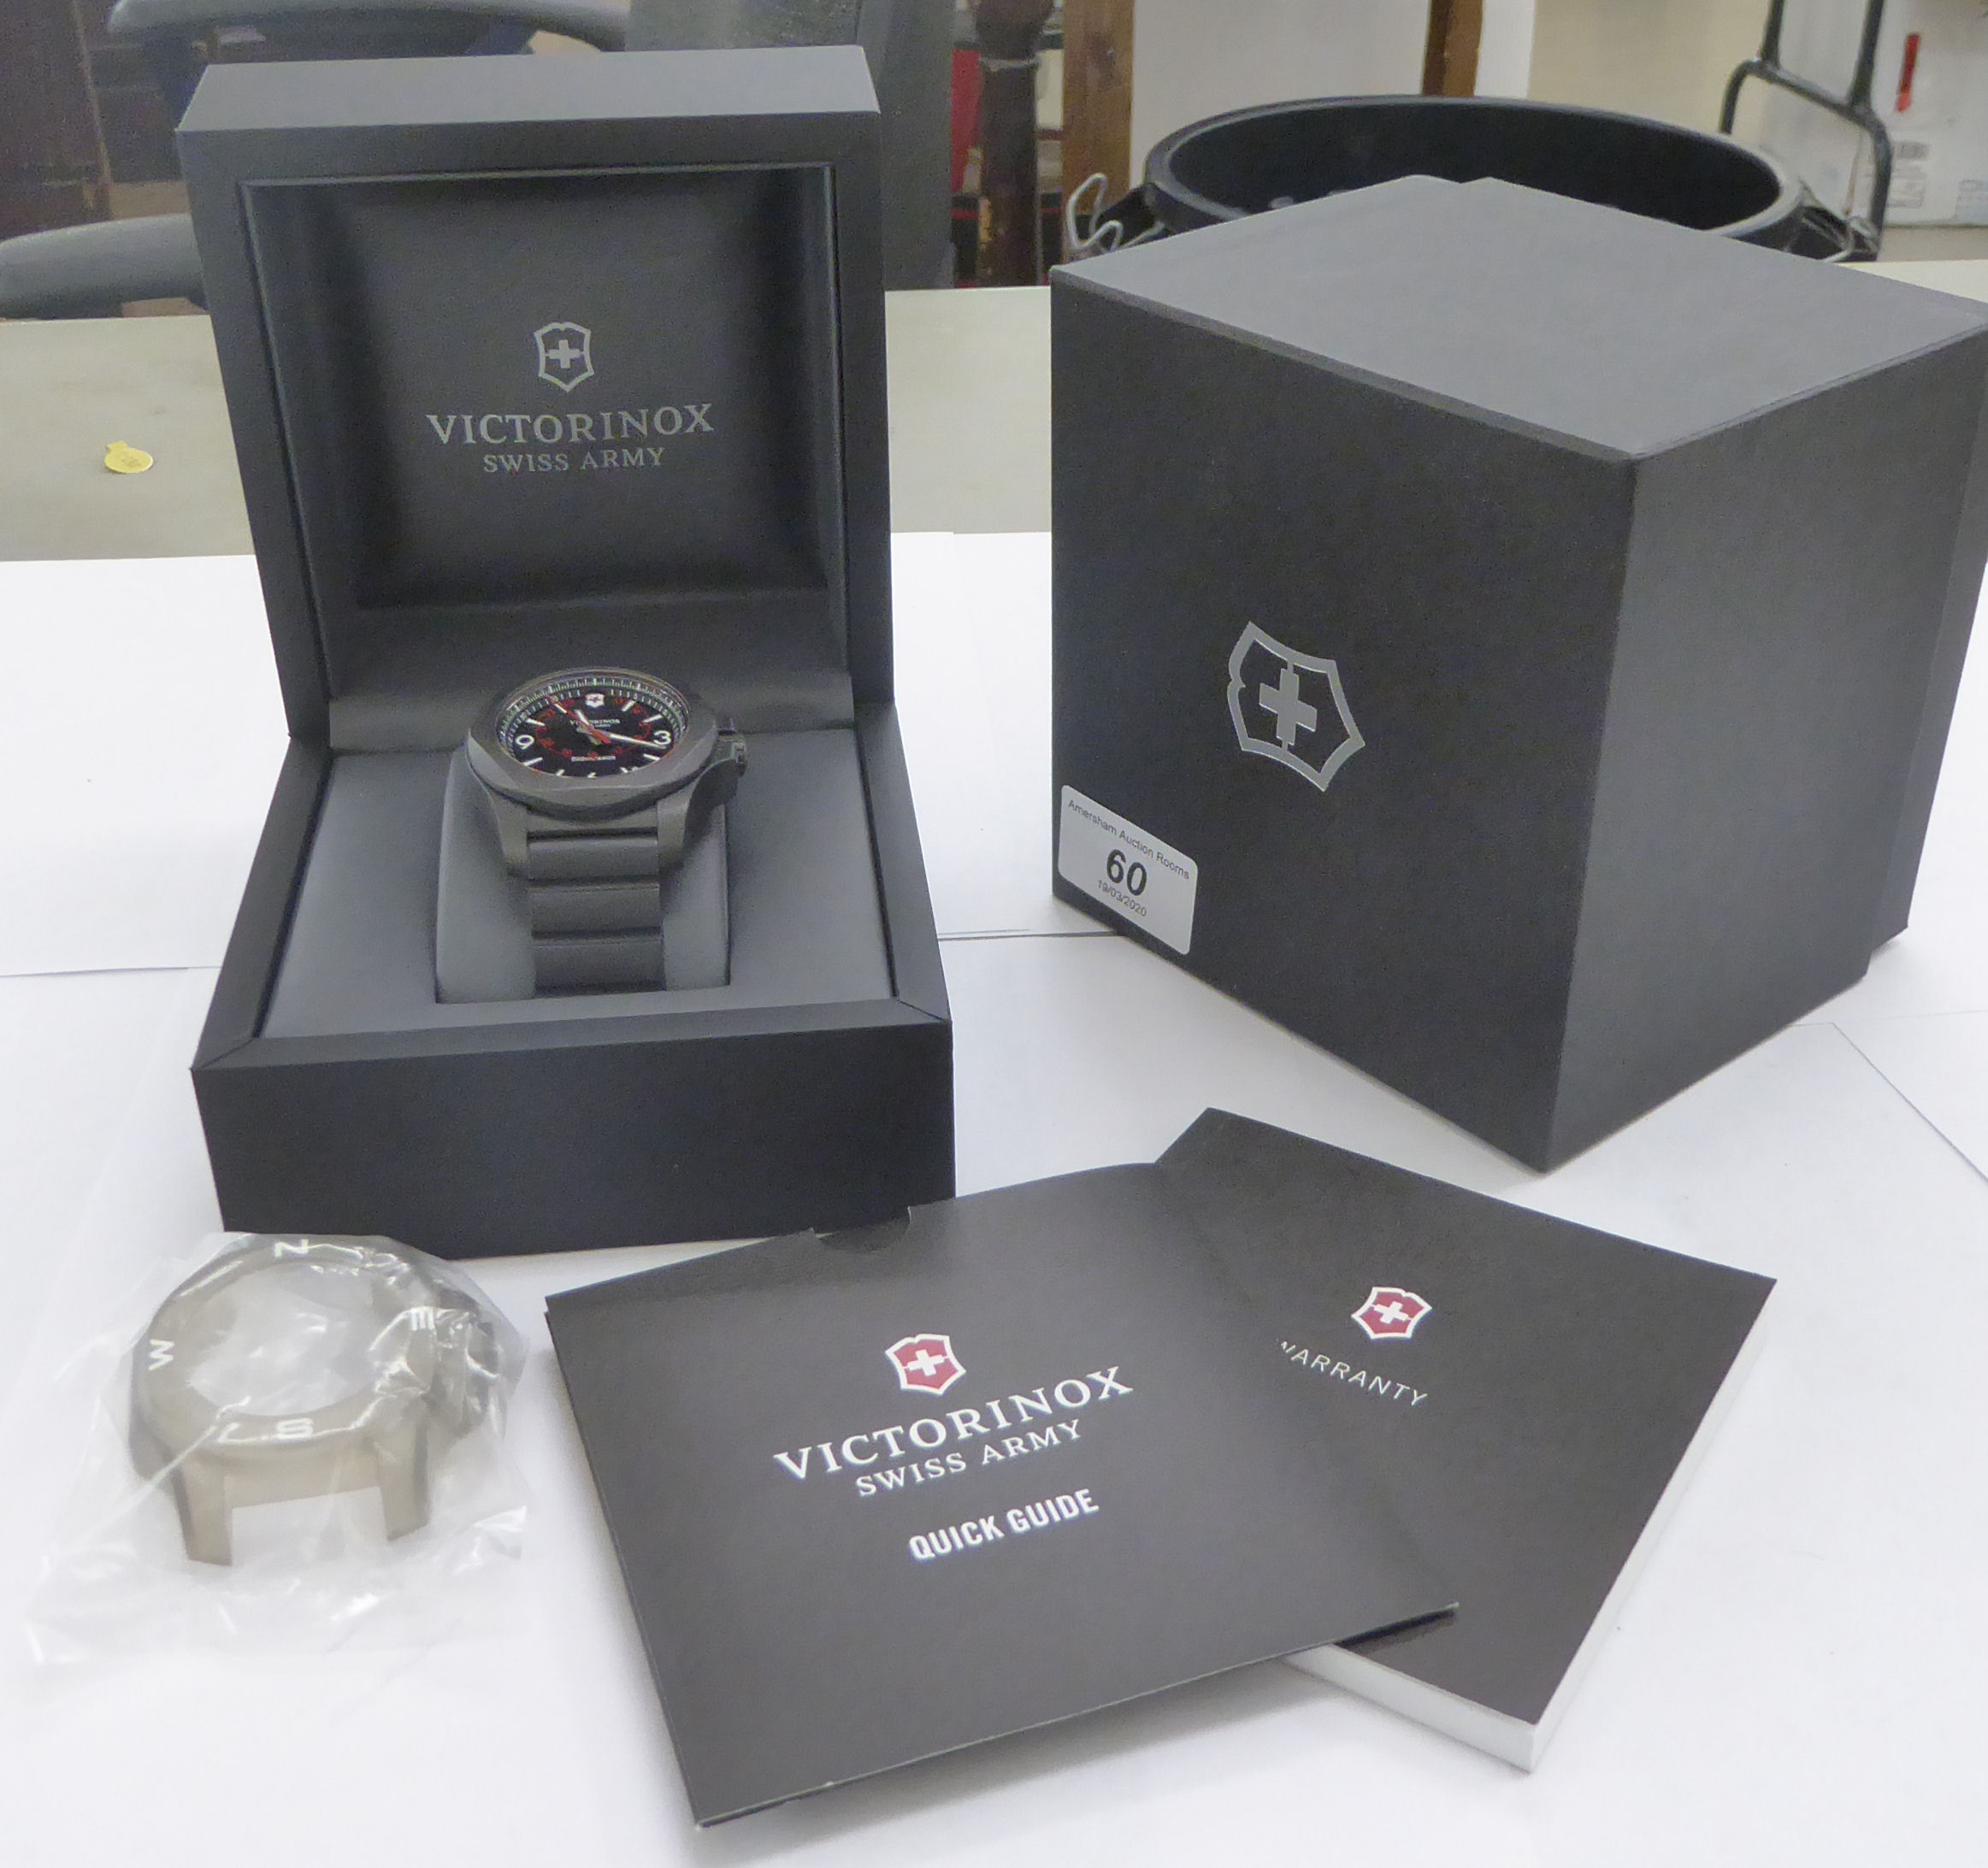 A Victroinox carbon cased Pilot wristwatch, - Image 2 of 3